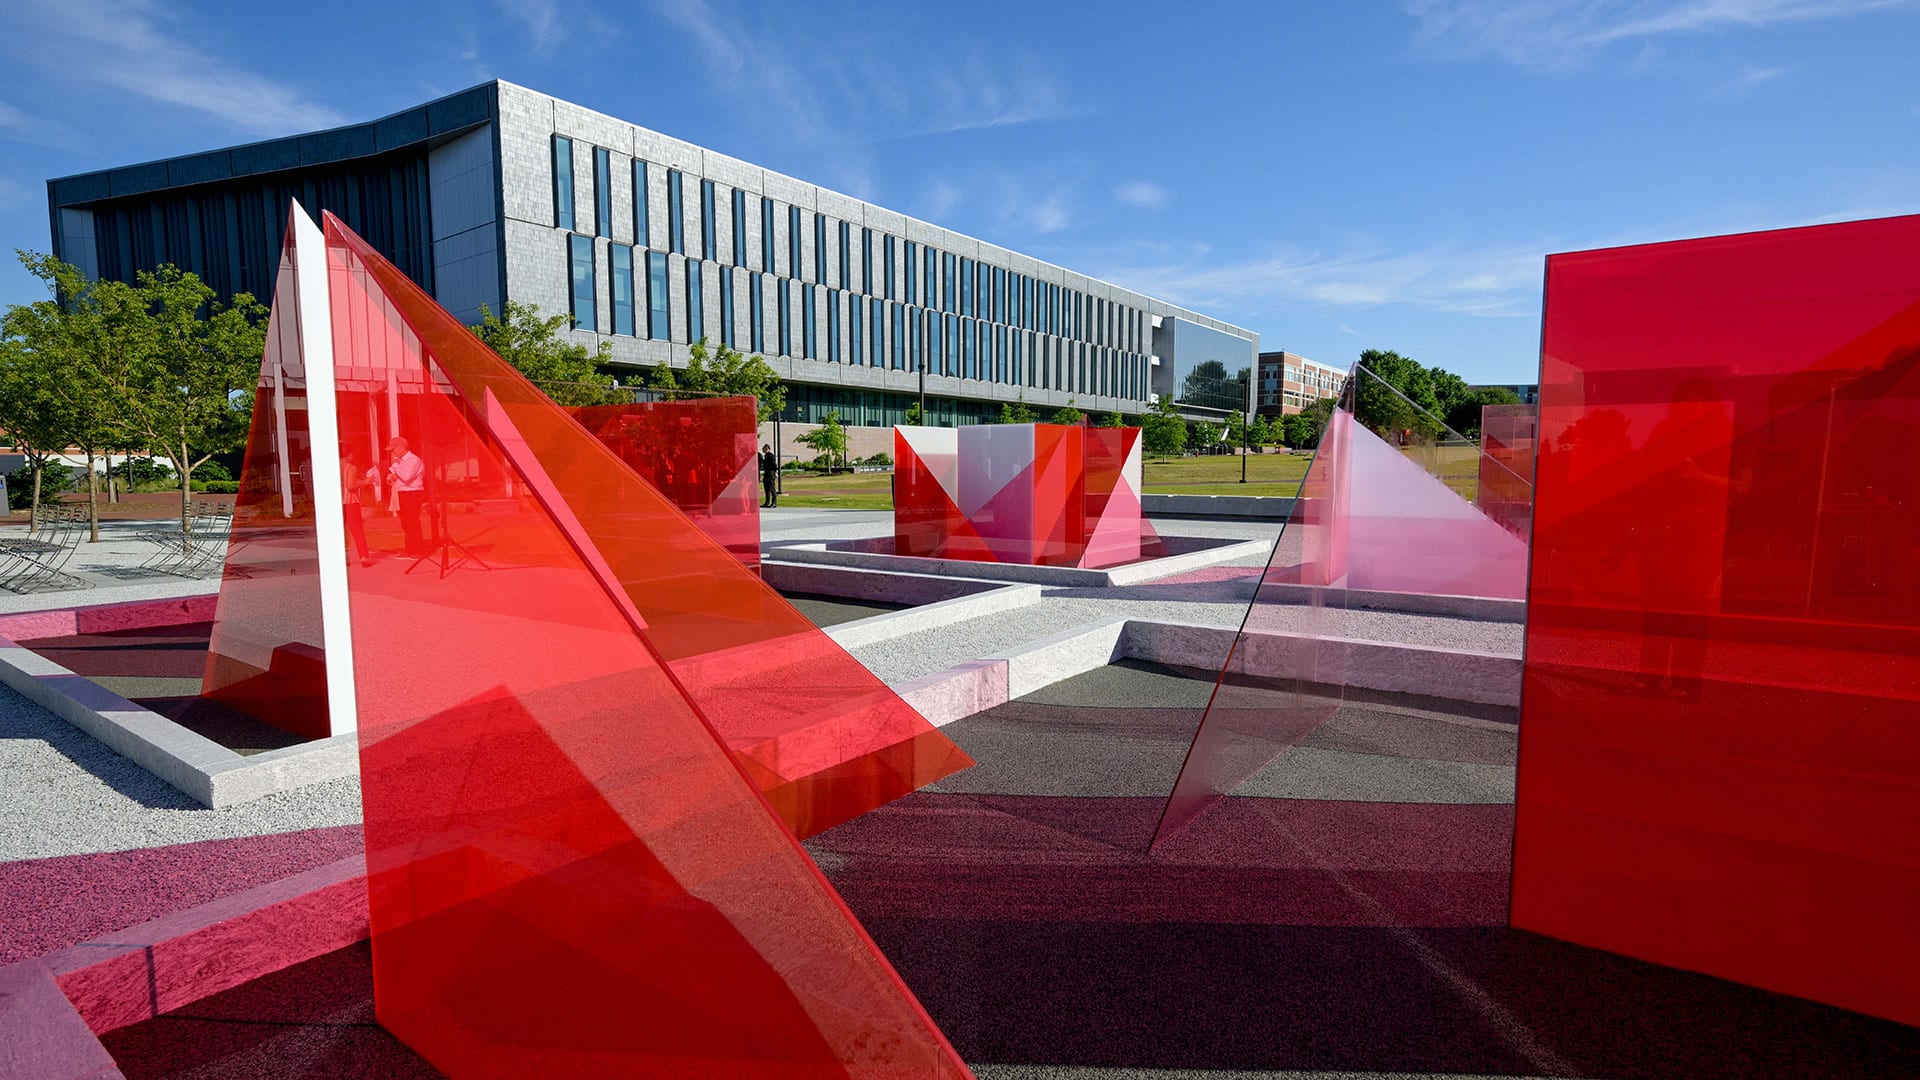 A view of the Reds and Whites installation by artist Larry Bell at the newly dedicated Susan Woodson Plaza, just outside the James B. Hunt Jr. Library on Centennial Campus.